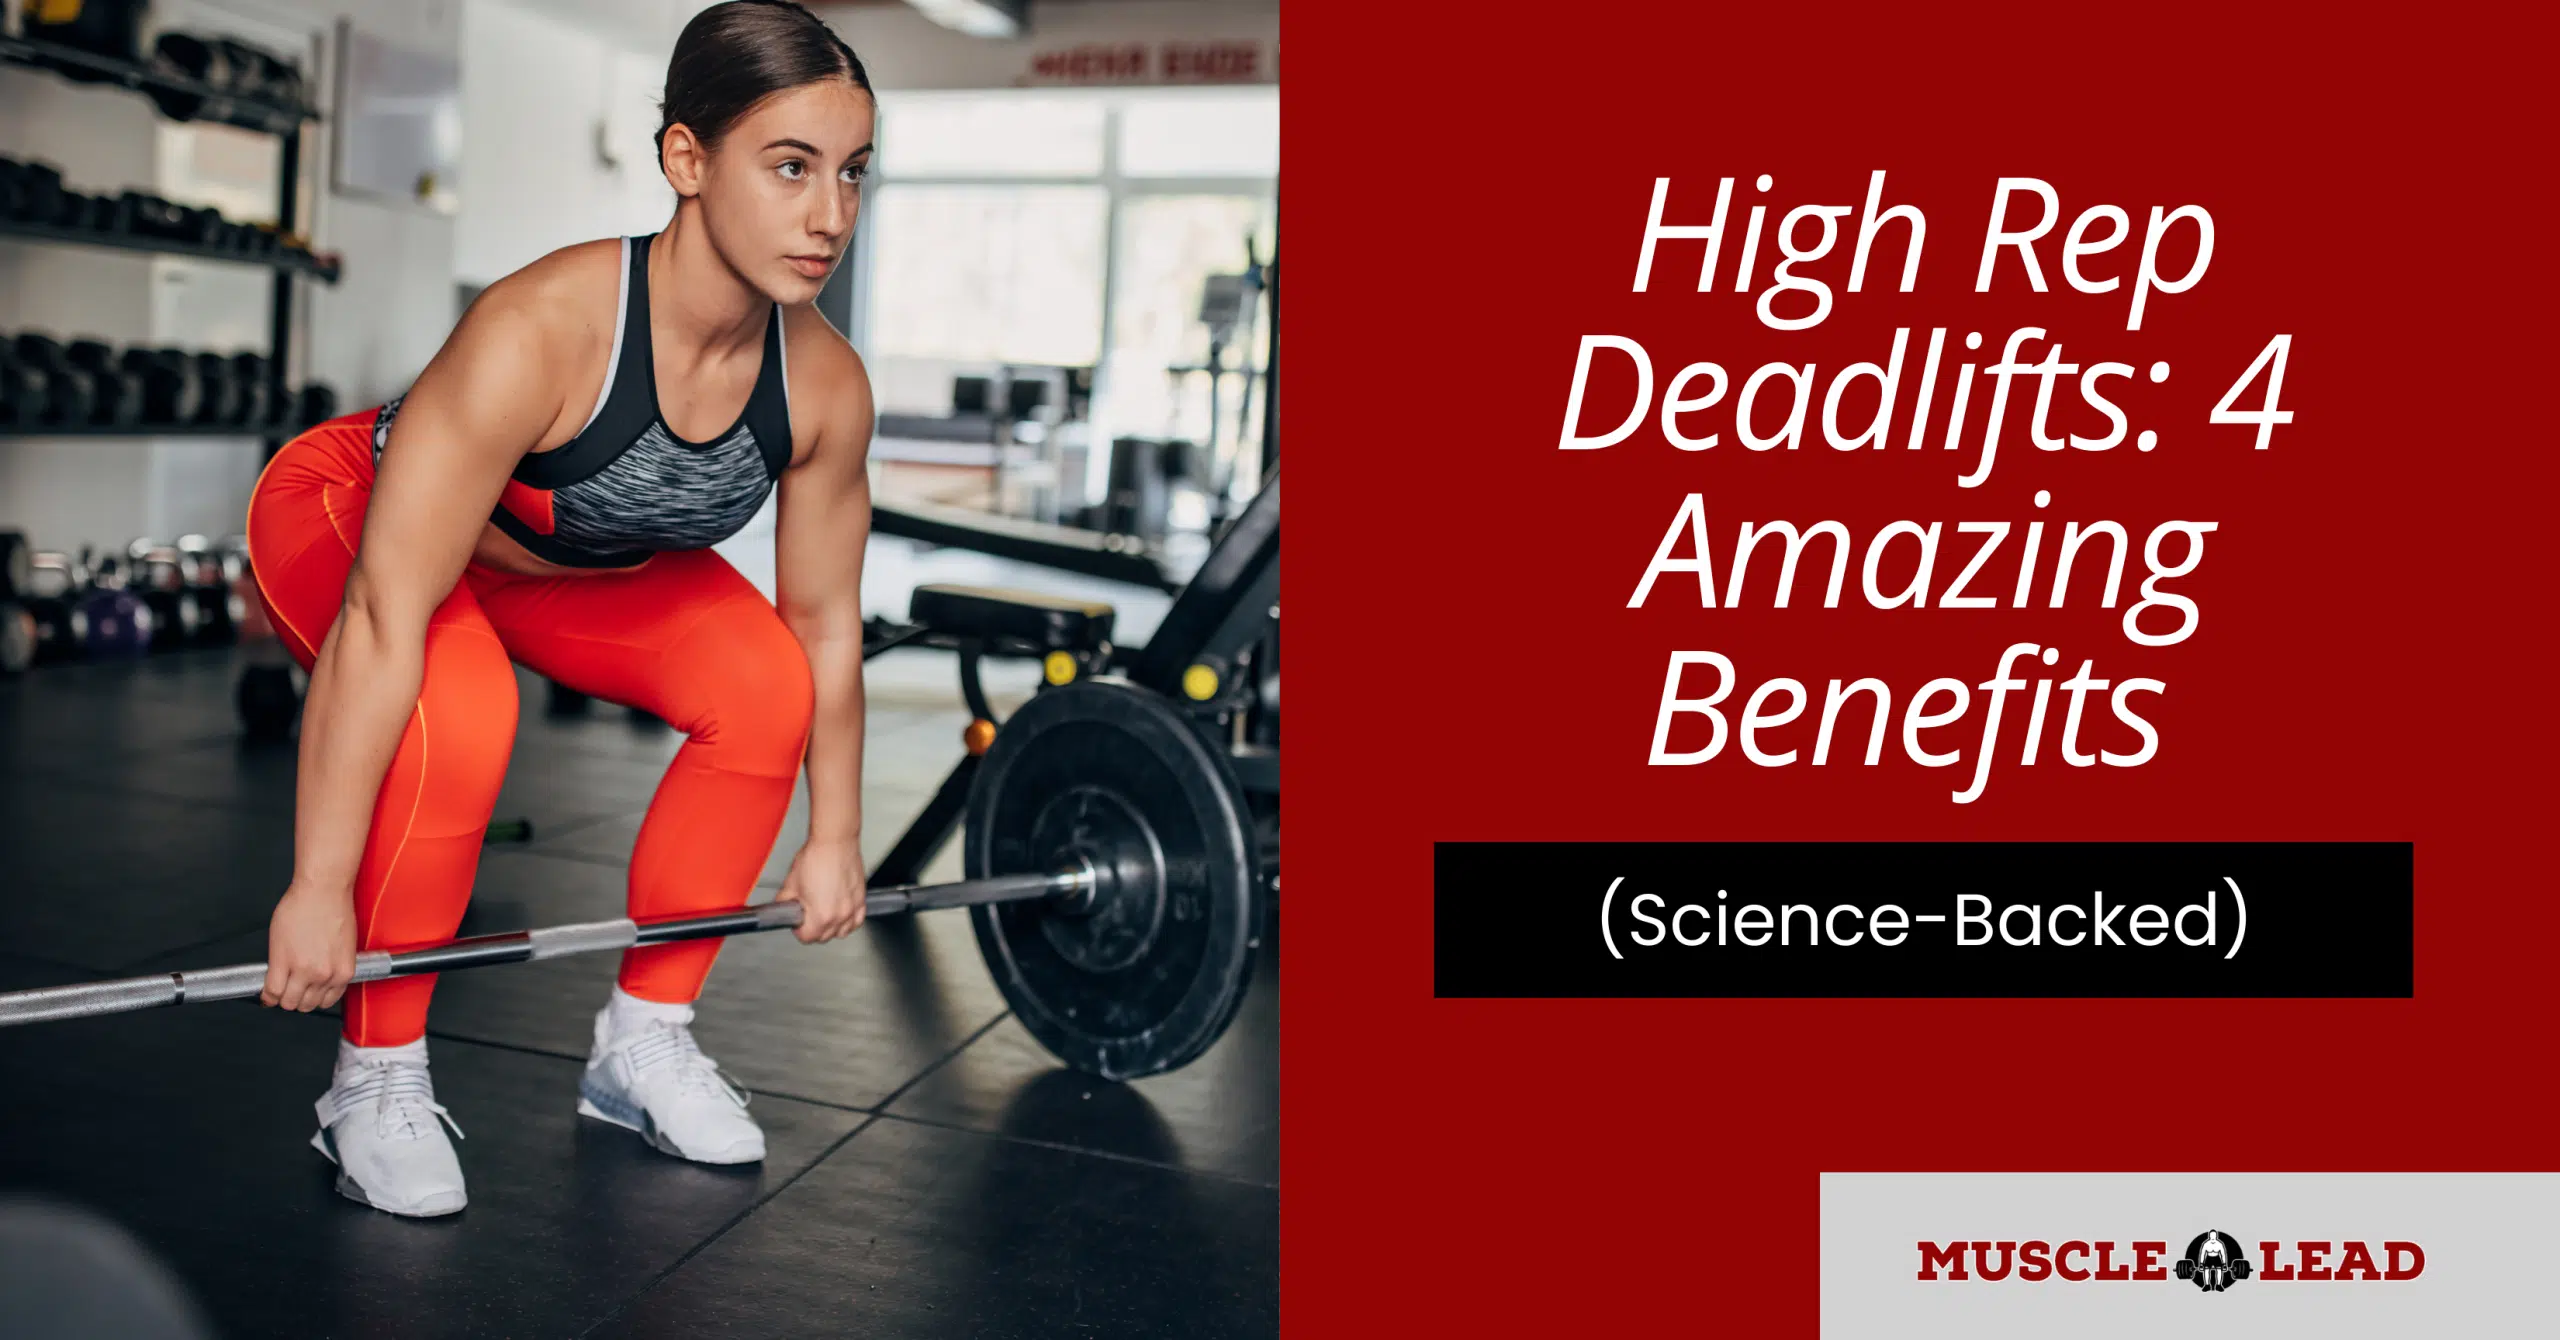 High Rep Deadlifts 4 Amazing Benefits (Science-Backed)